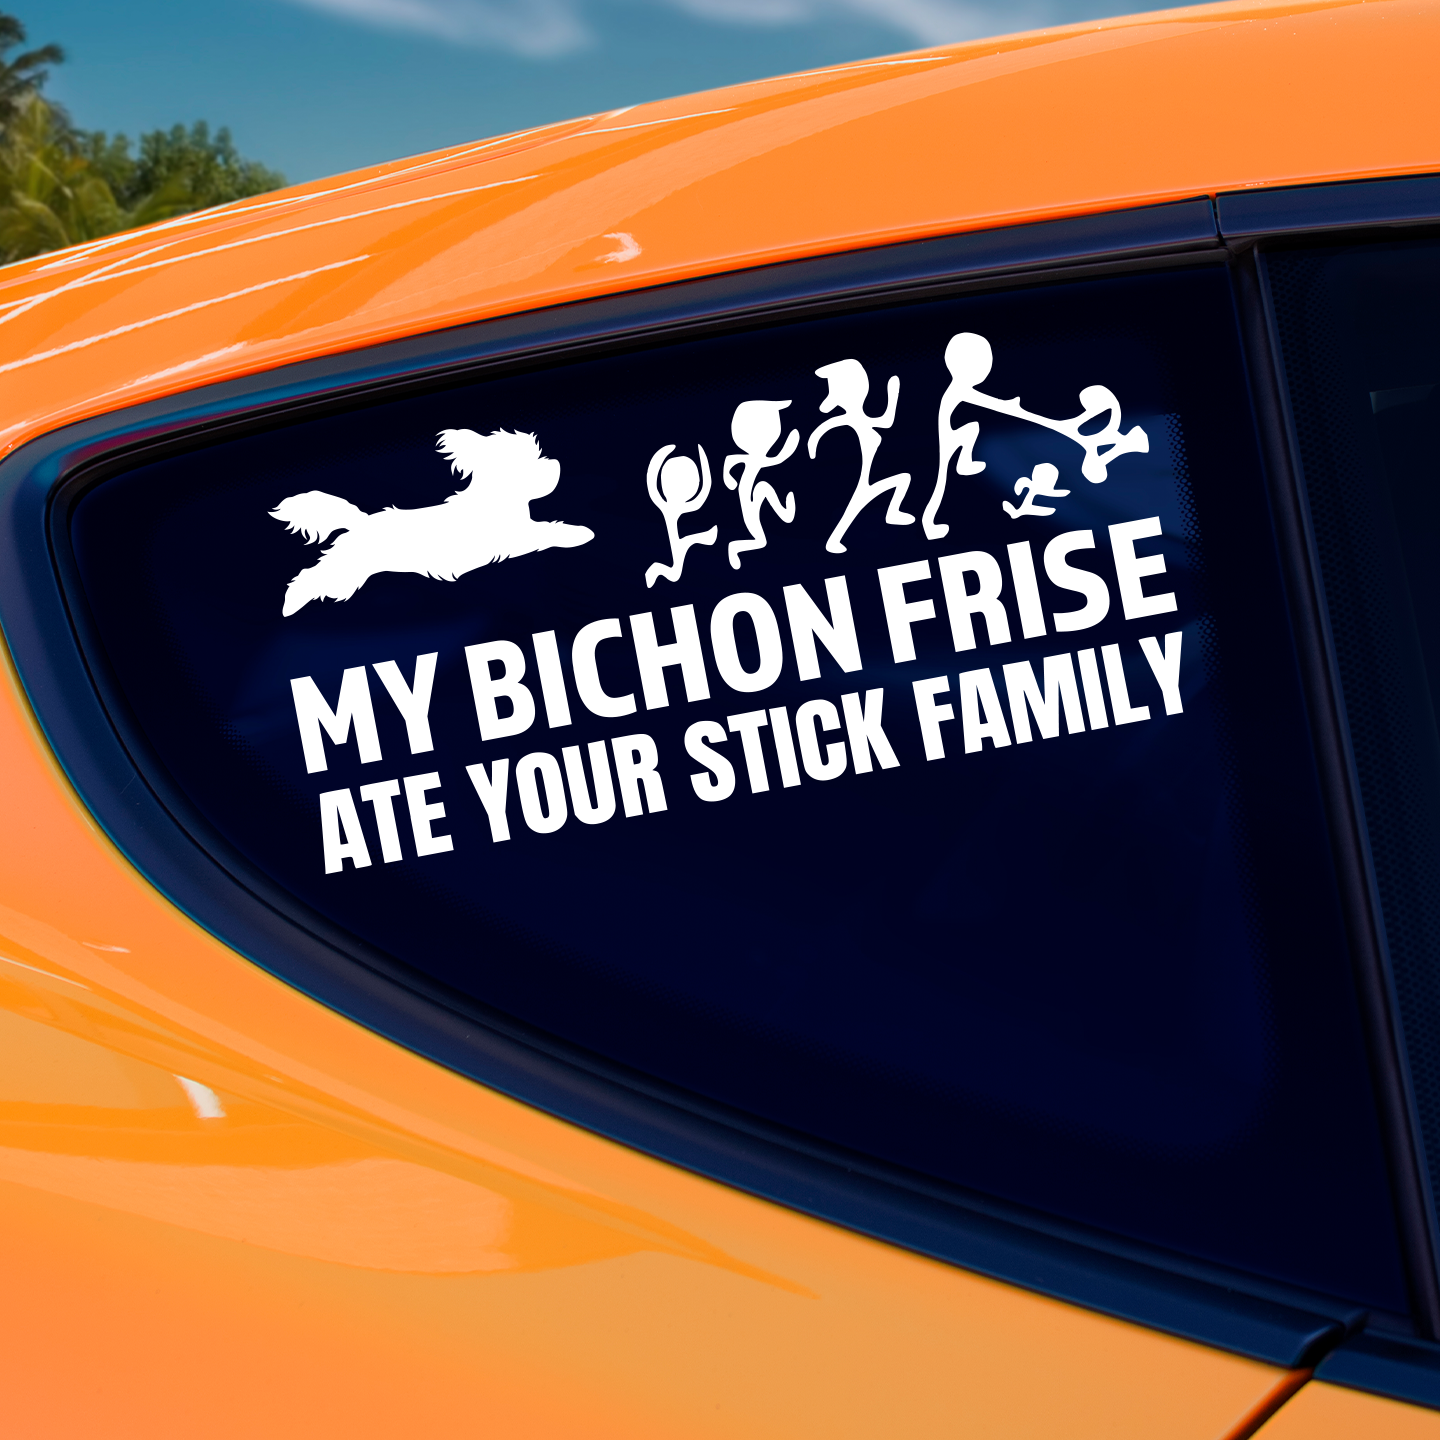 My Bichon Frise Ate Your Stick Family Sticker